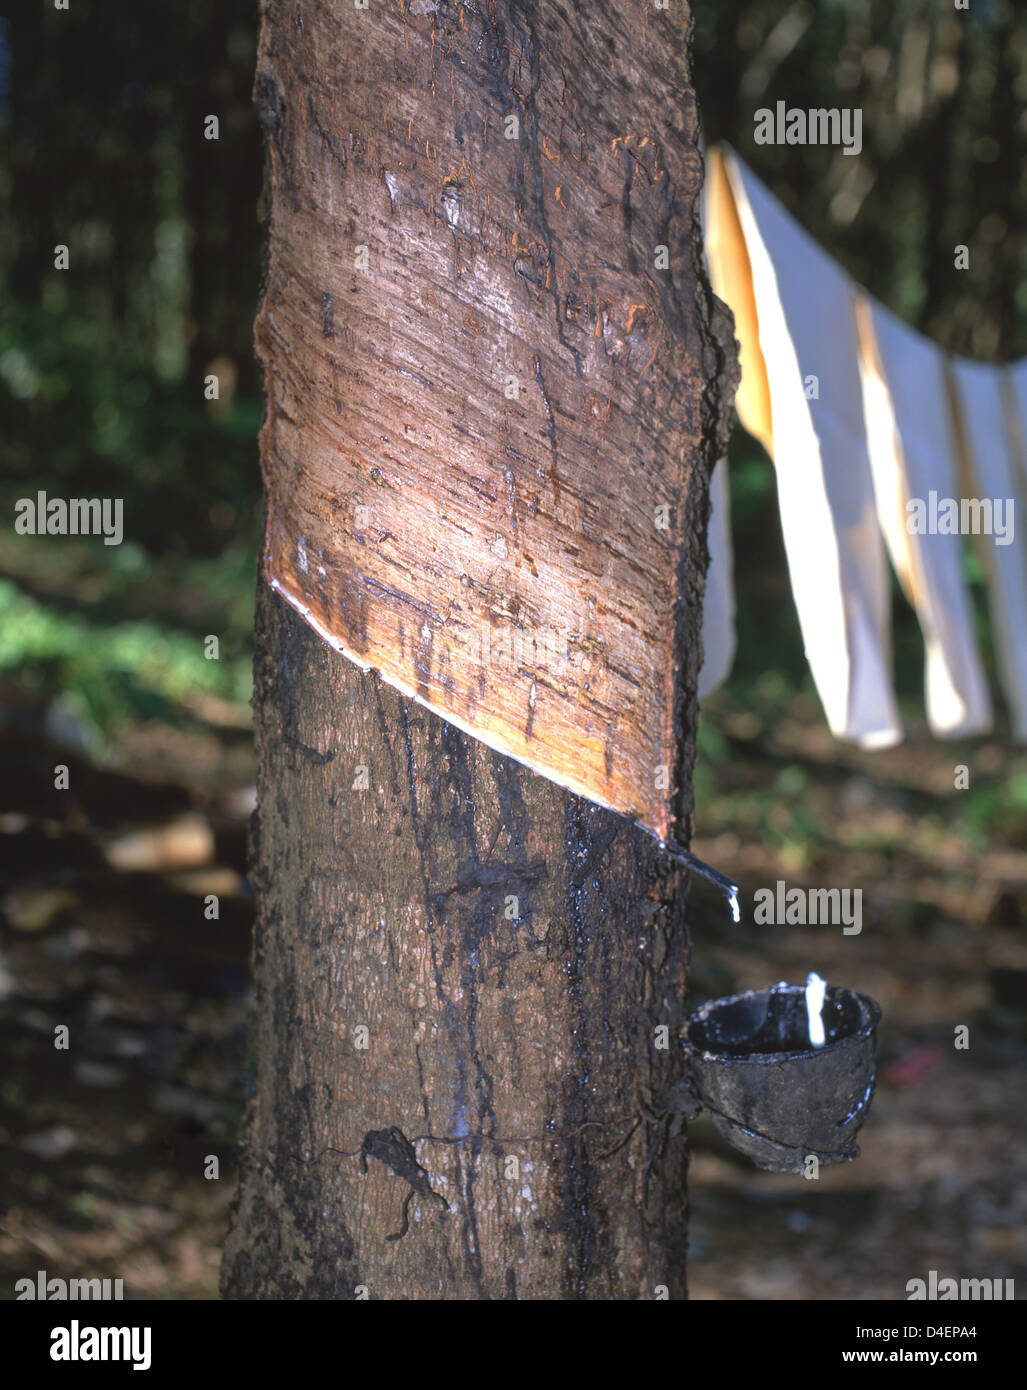 Collecting sap from rubber tree at Rubber Plantation, Phuket, Phuket Province, Thailand Stock Photo